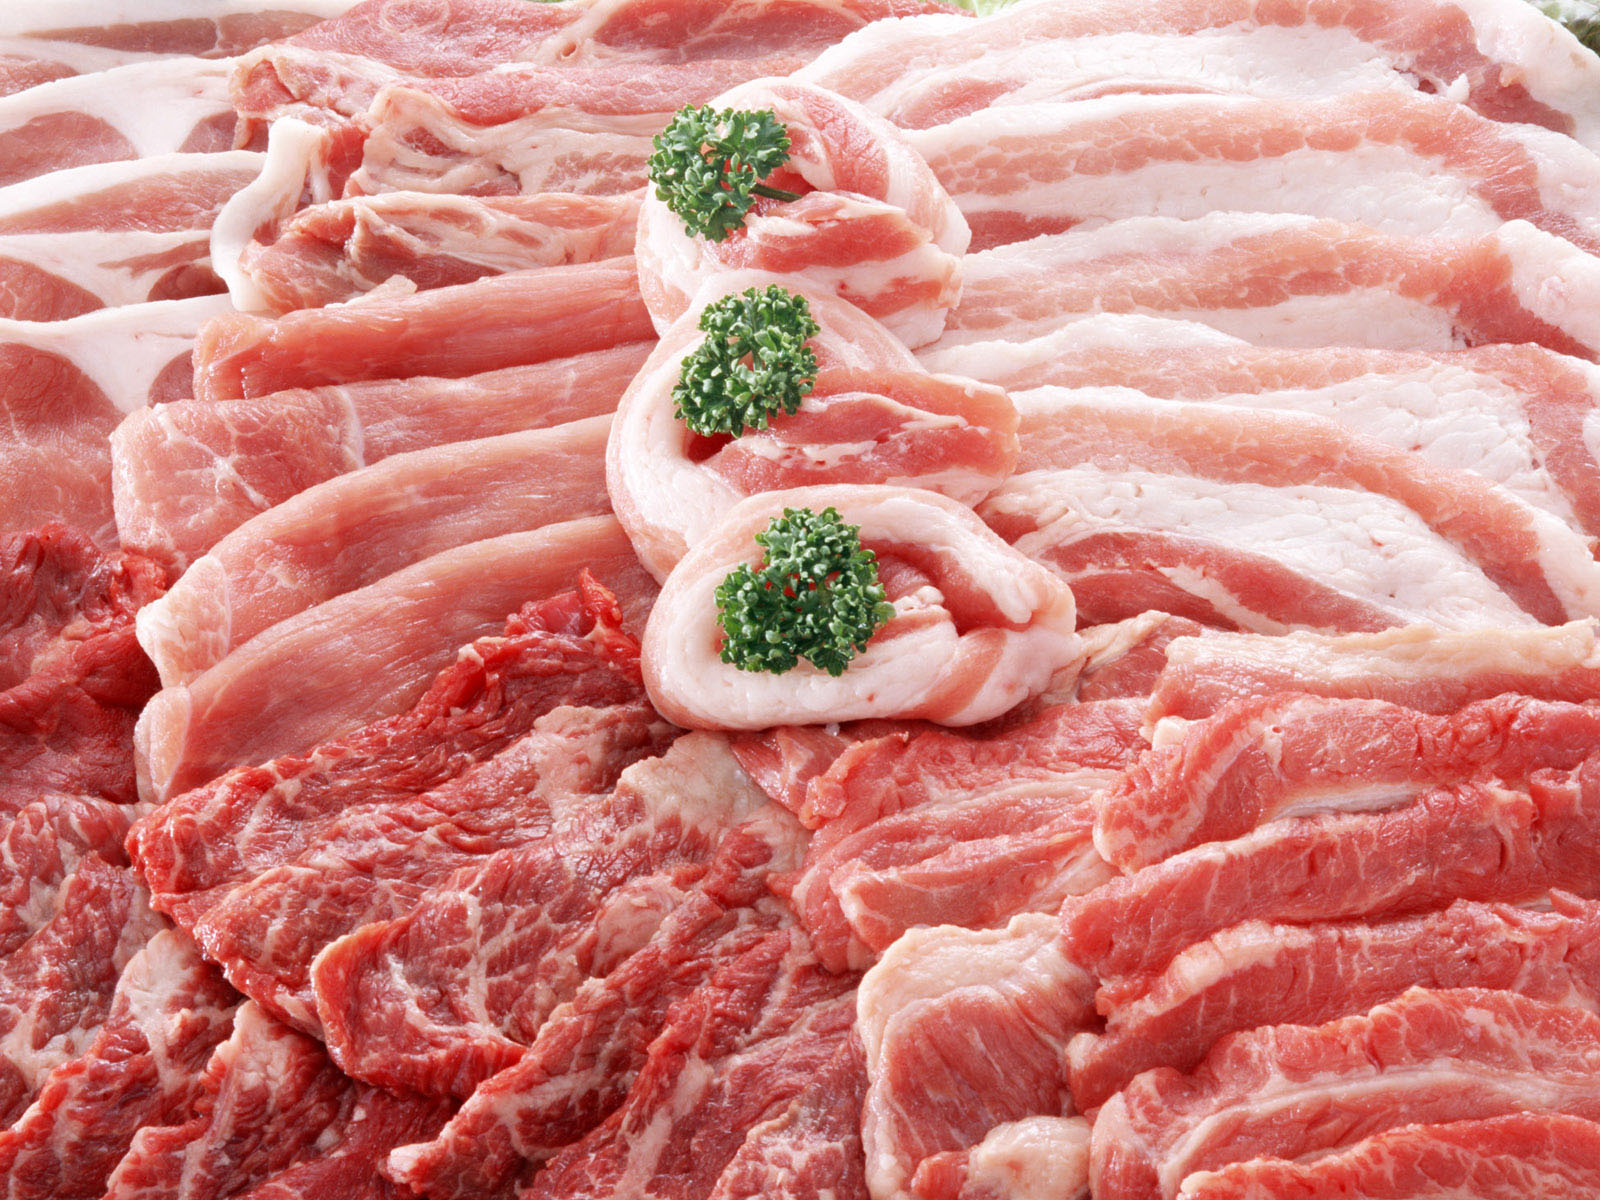 Download - Meat Photos High Resolution , HD Wallpaper & Backgrounds